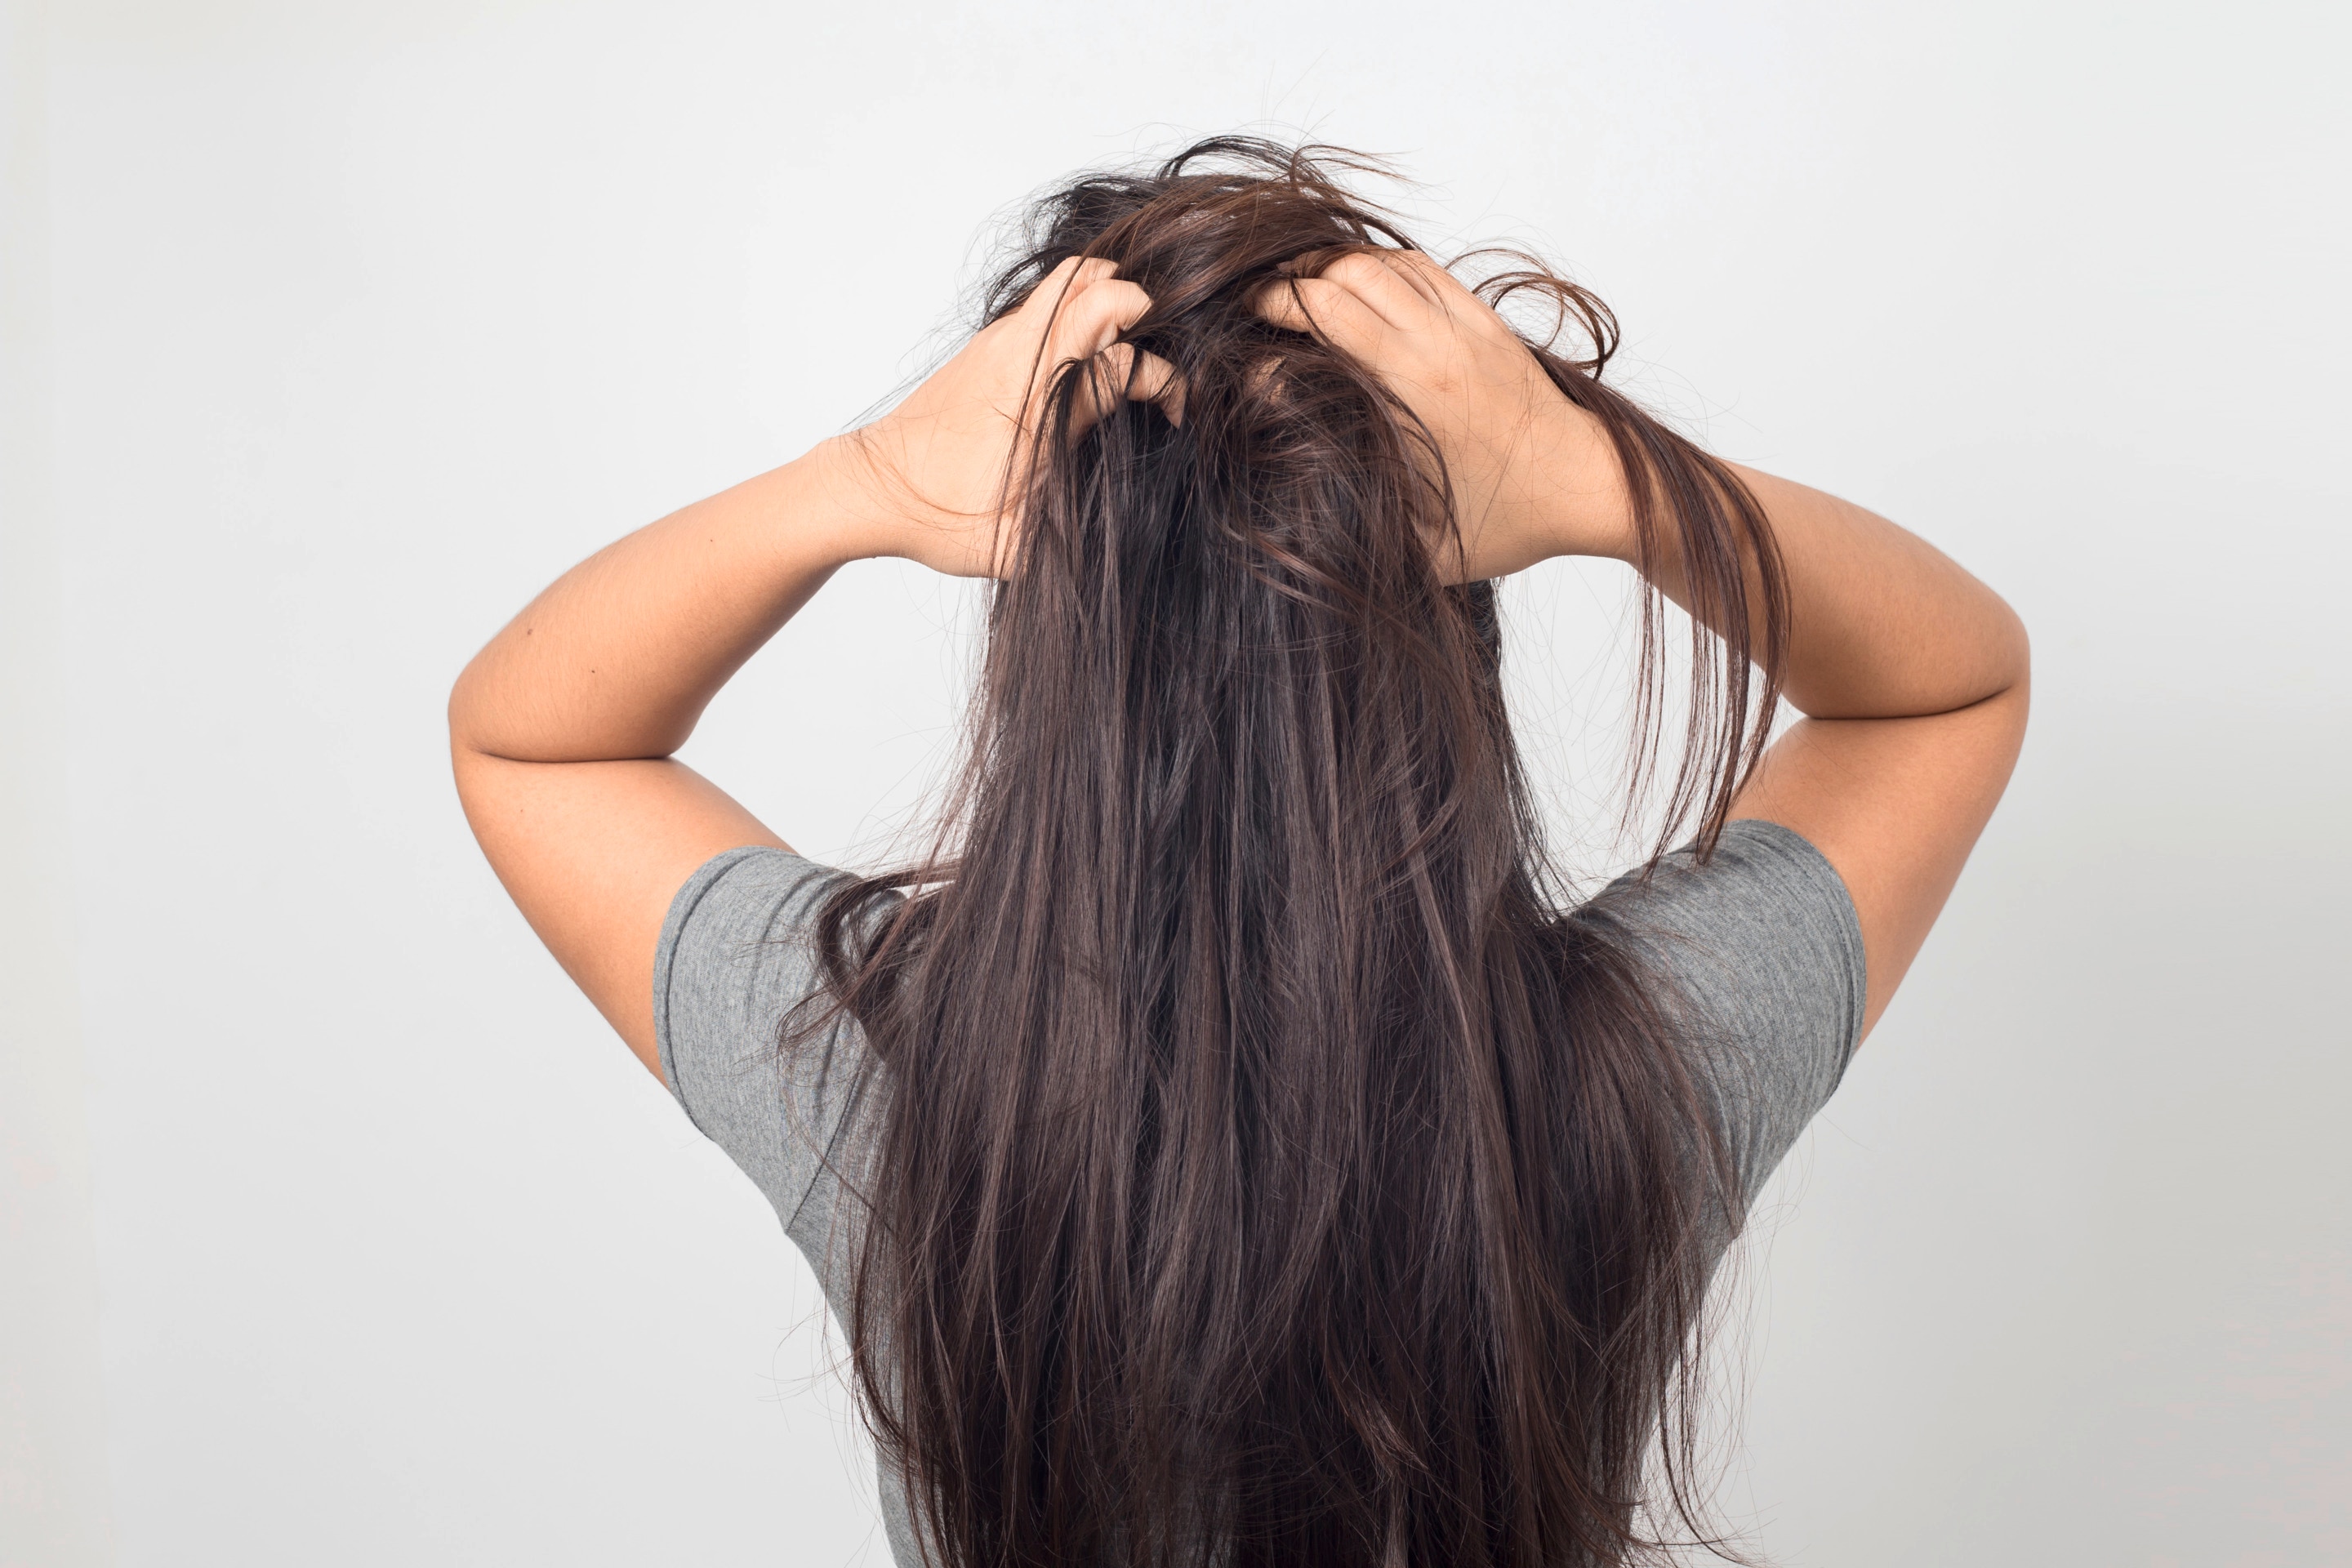 Women with itchy scalp scratching hair Text